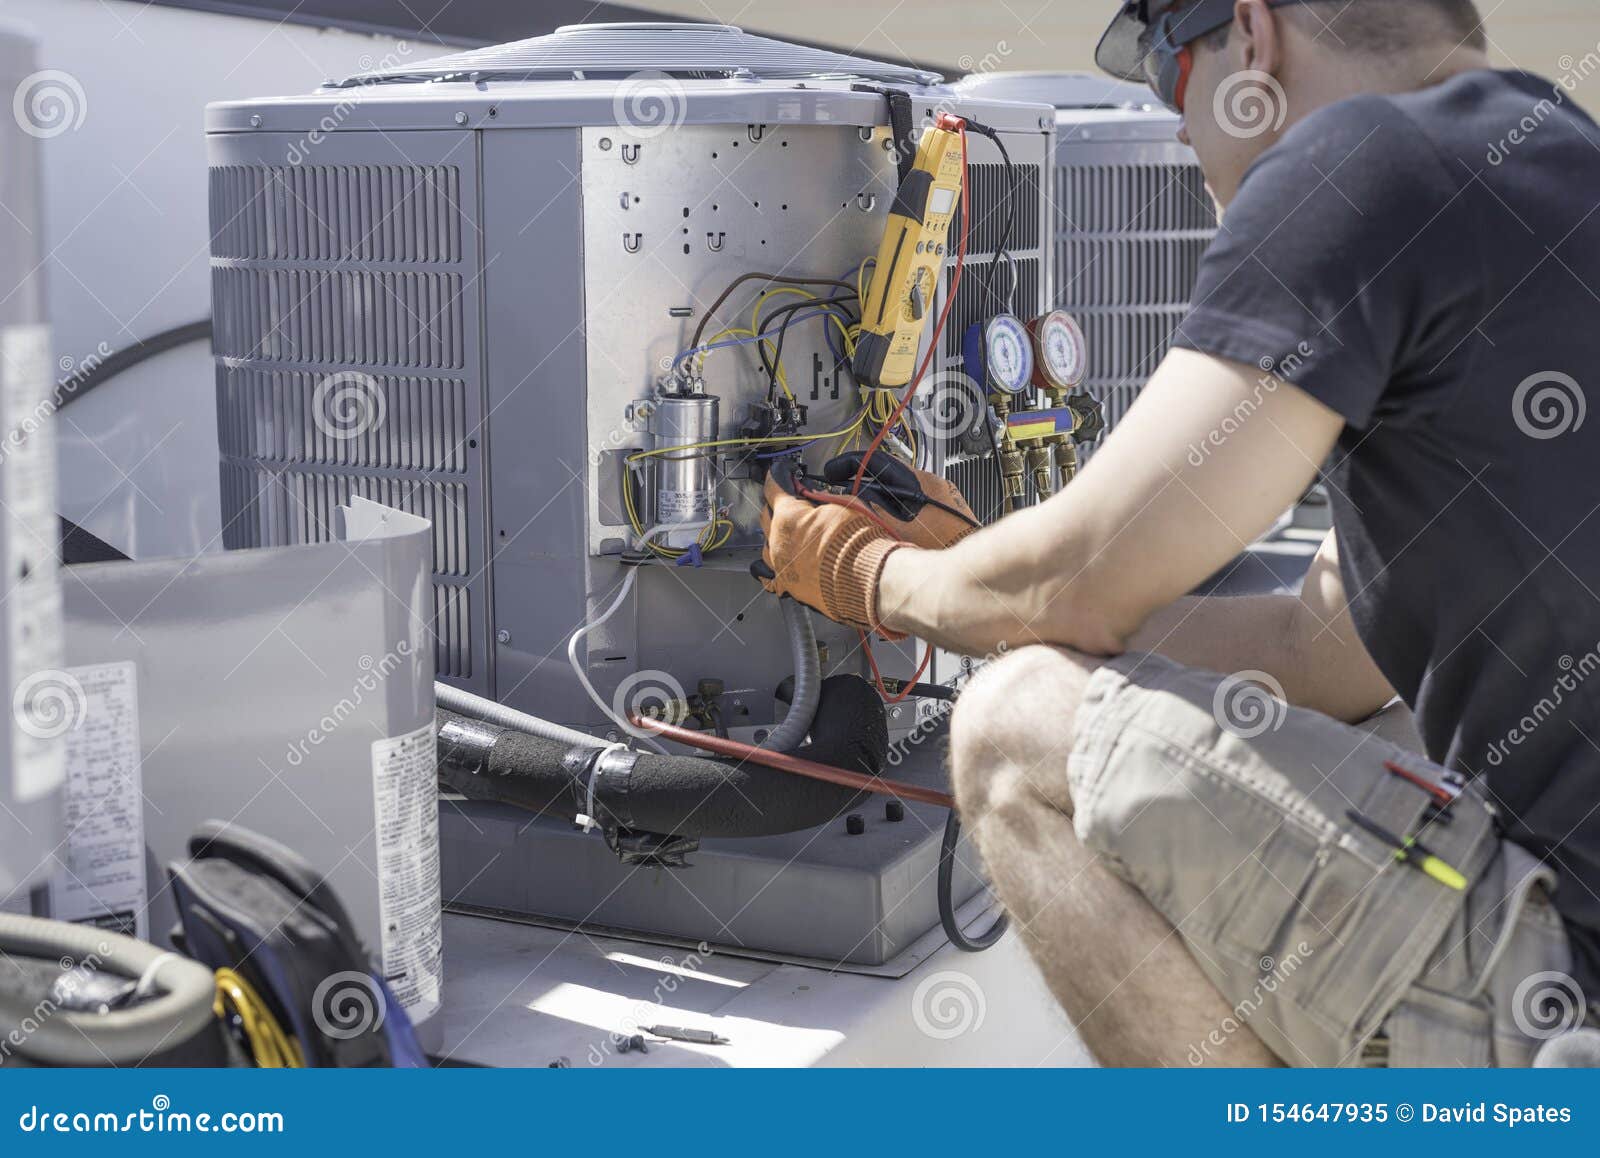 hvac technician working on controls of air conditioner